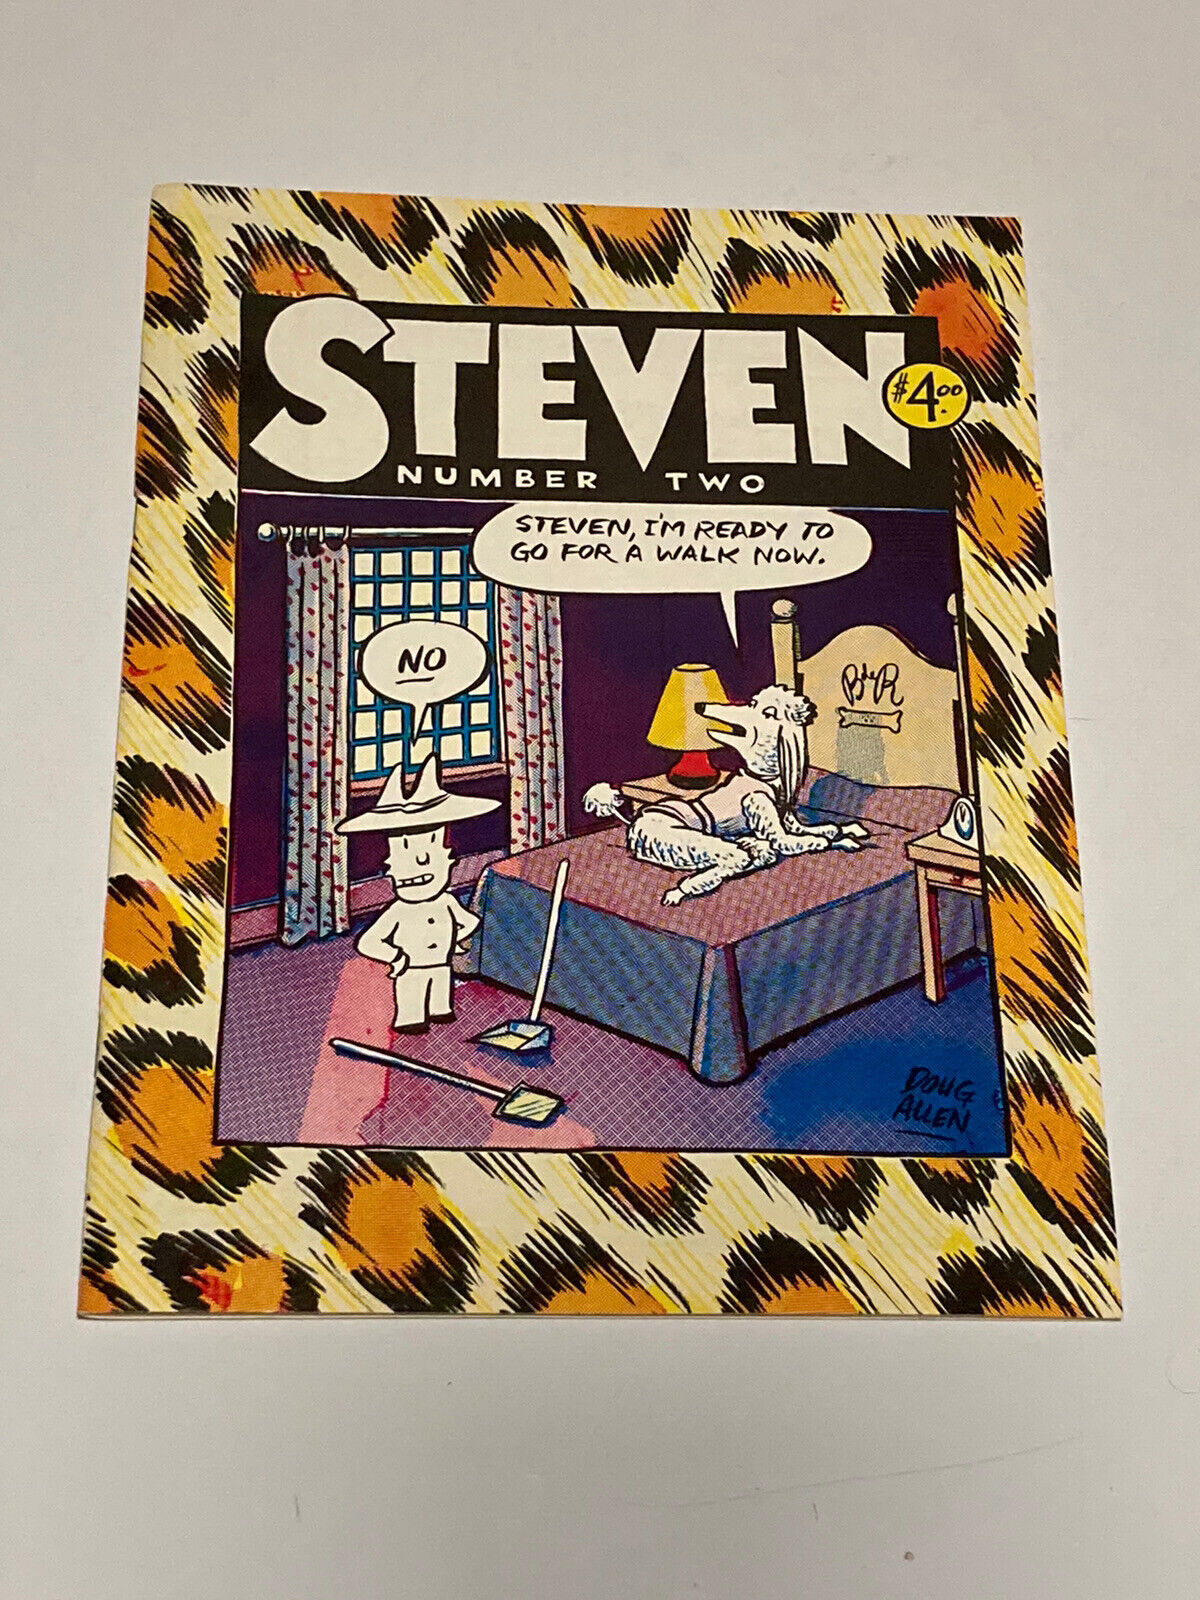 Steven #2  By Doug Allen - 1st Printing 2000 Copies Made 1988 Rare